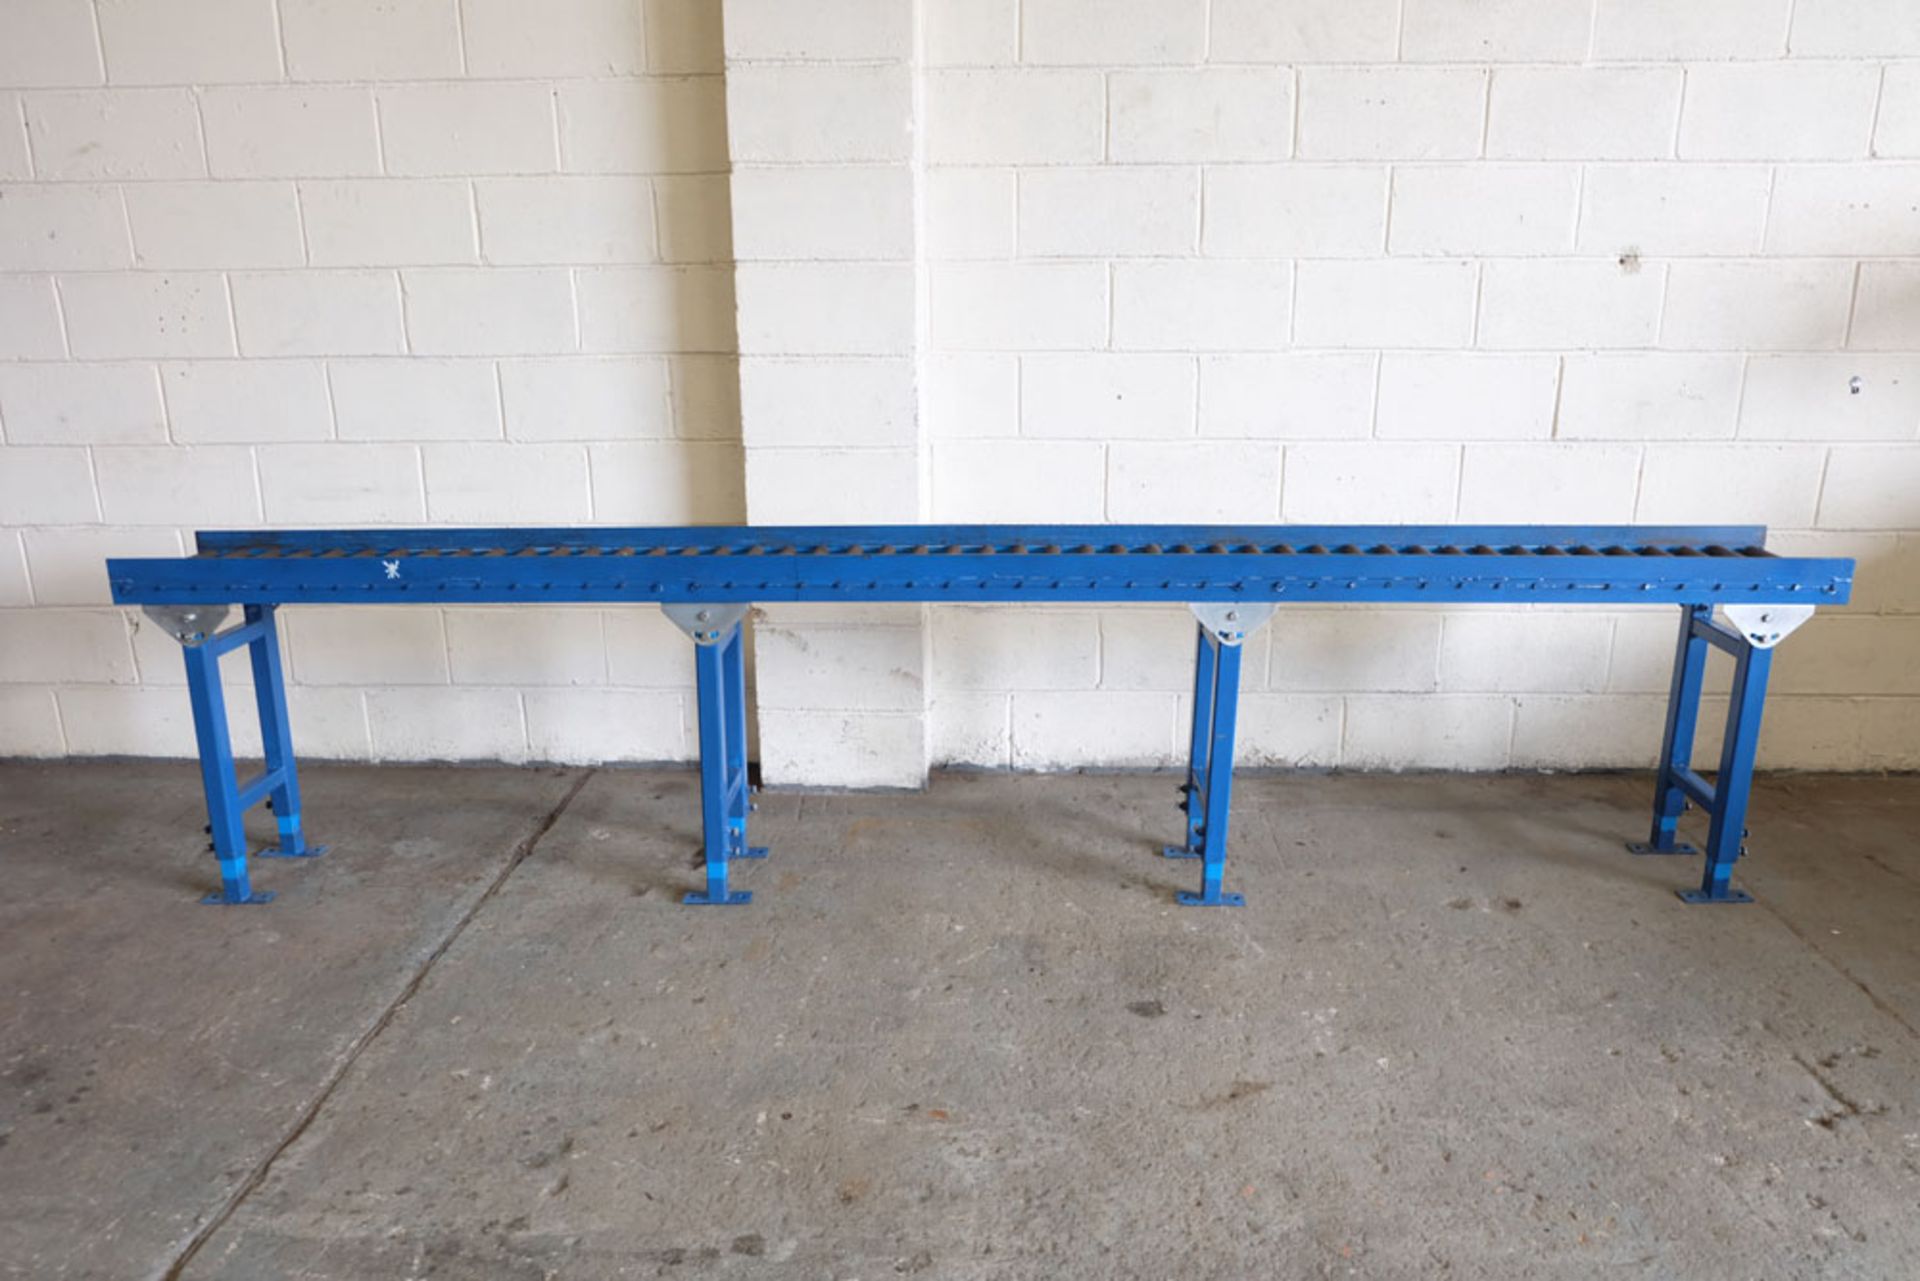 Roller Conveyors. Approx 12' x 13" x 32" High (Height Adjustable).